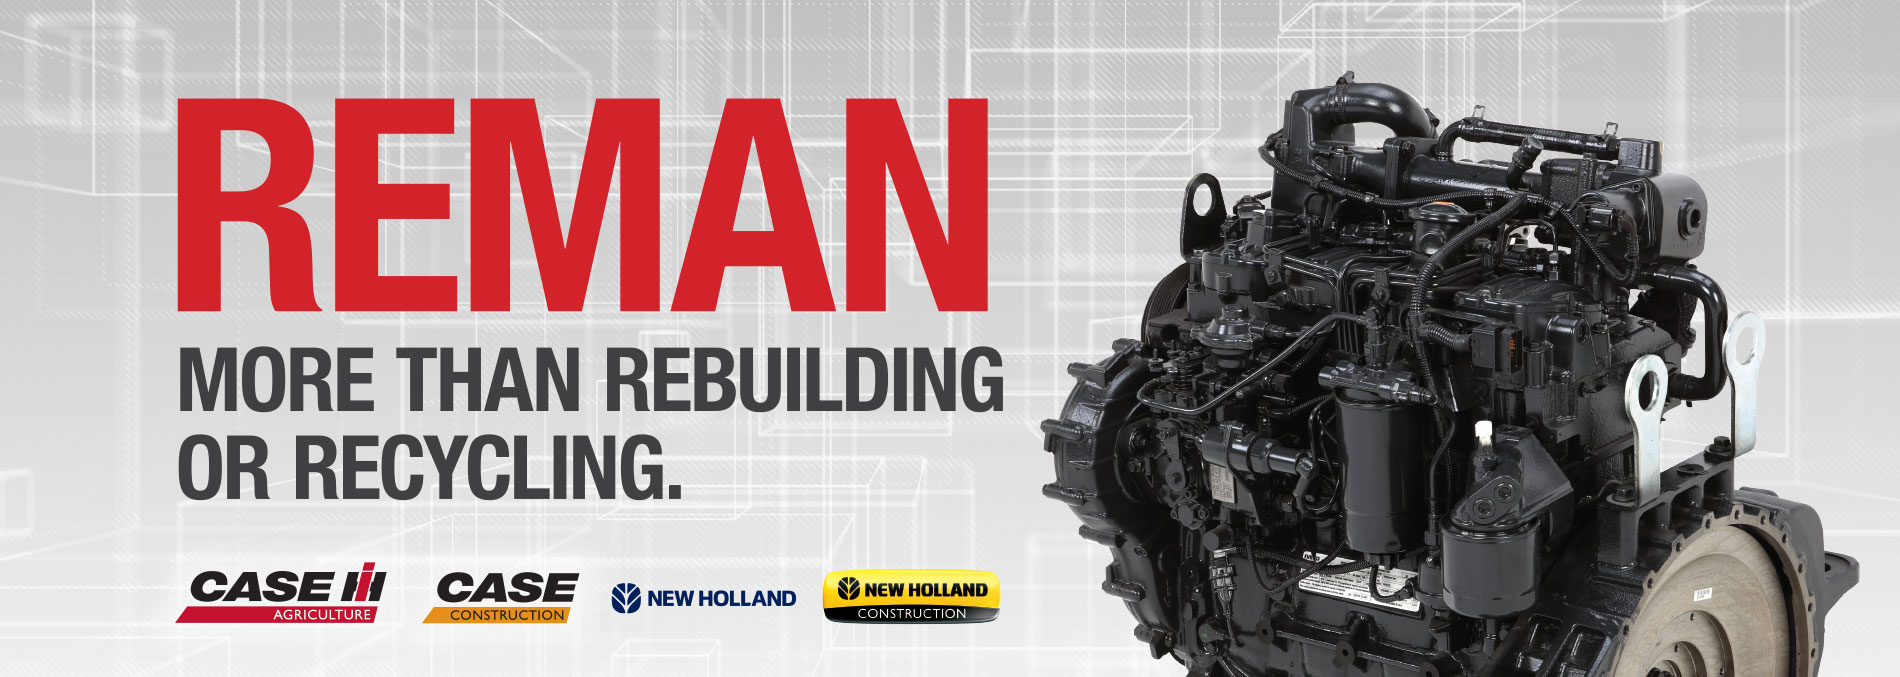 CNH Industrial REMAN. More than rebuilding or recycling